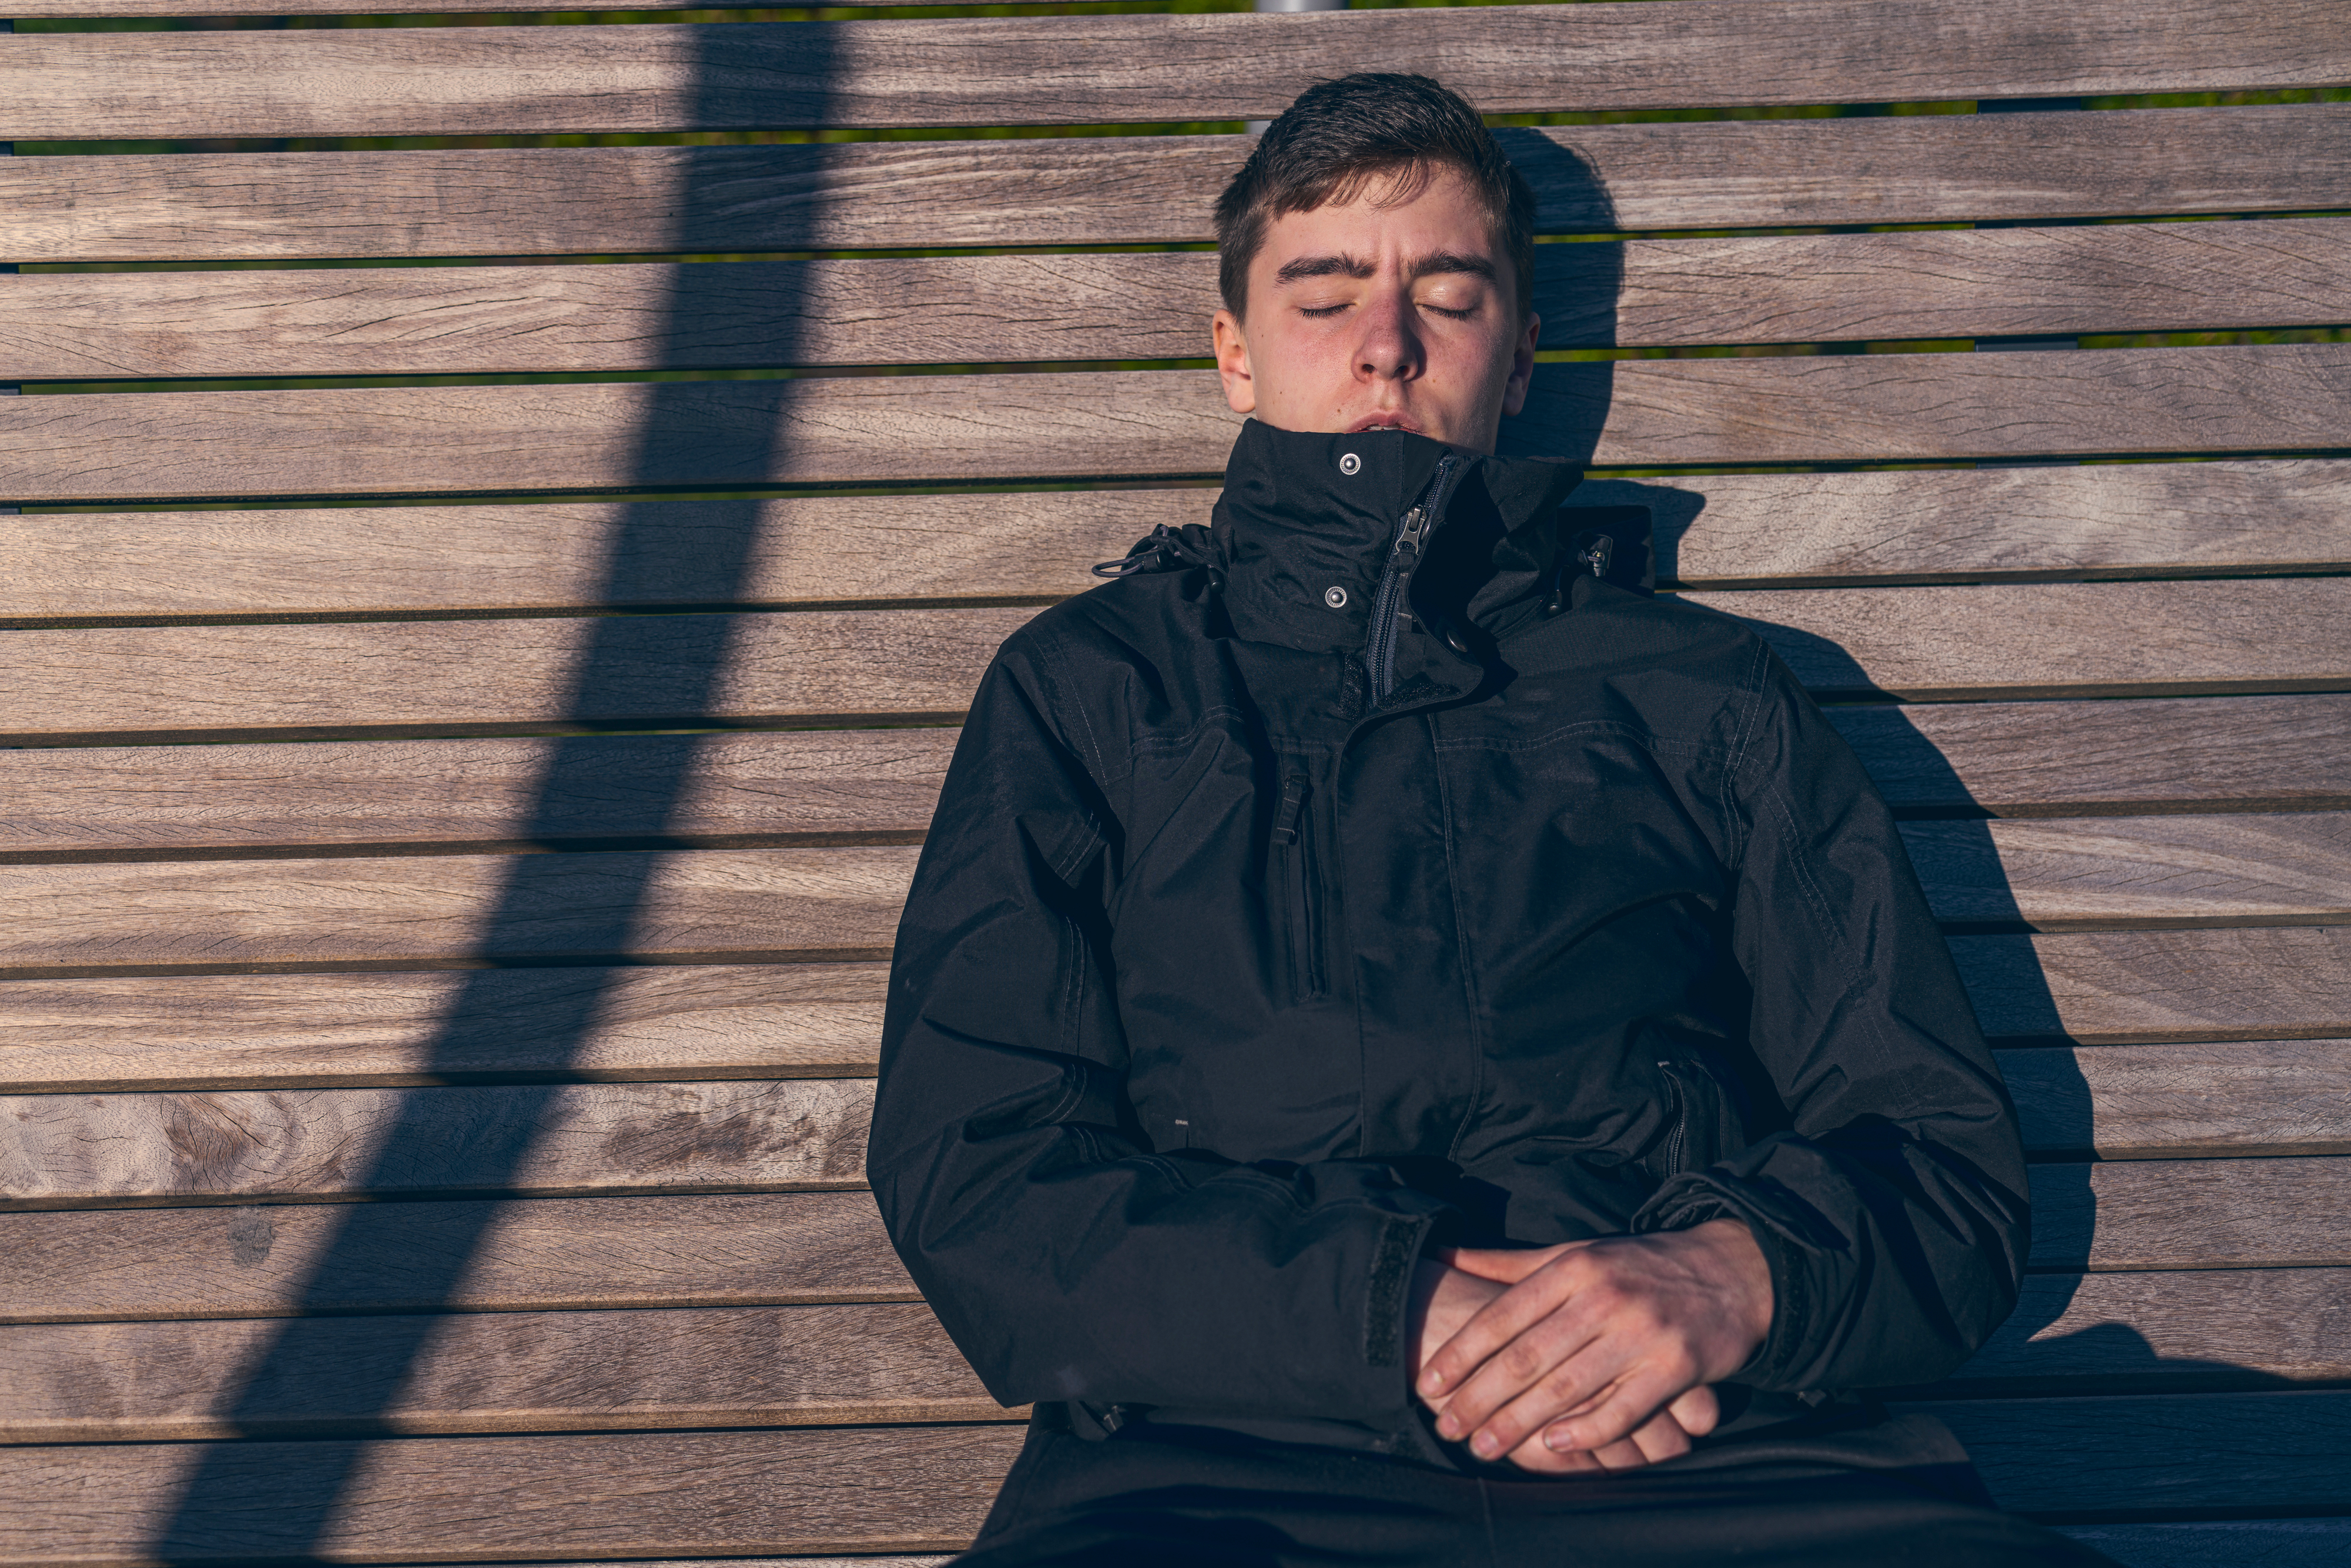 Young man sitting on a bench in the sun with his eyes closed | Source: Shutterstock